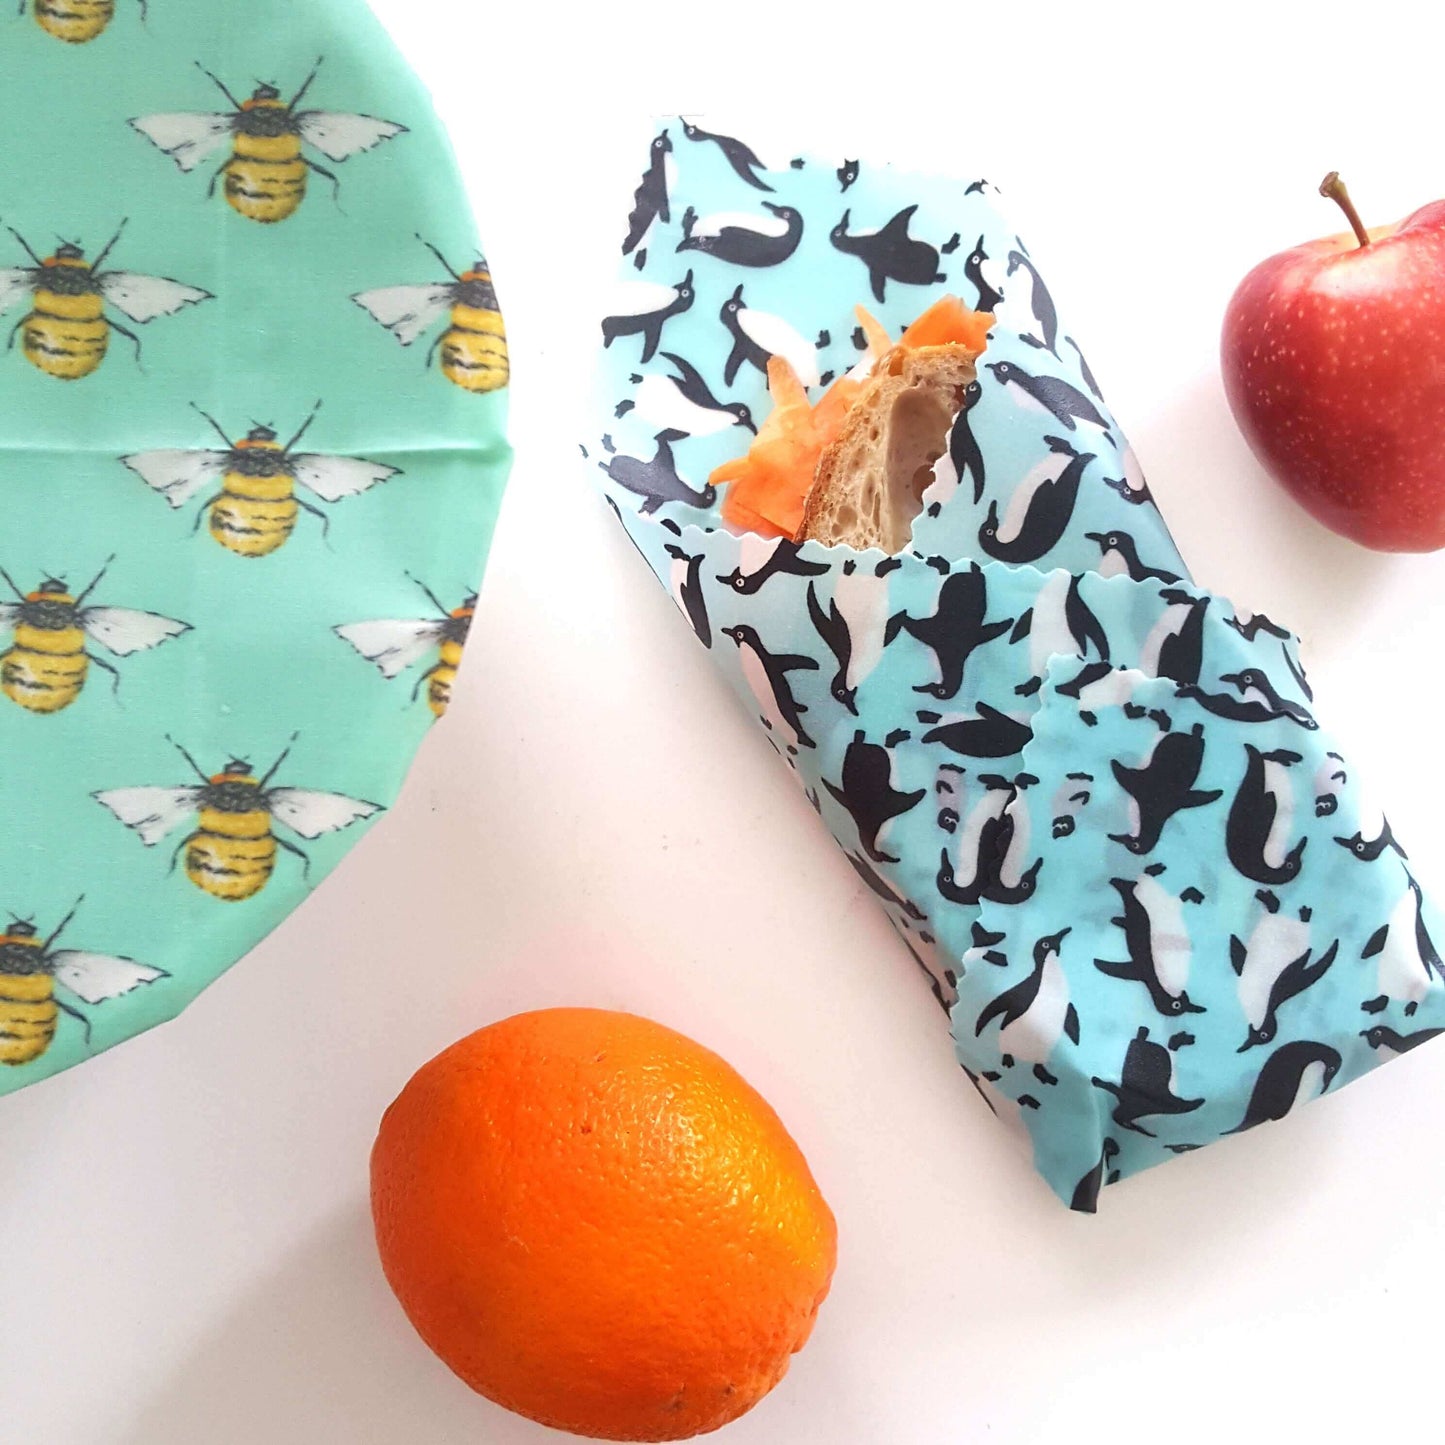 Reusable Beeswax Food Wraps 100% Hand Made in the UK by Honey Bee Good shown in Set of 3 Classic Penguins, Hens & Bees flatlay